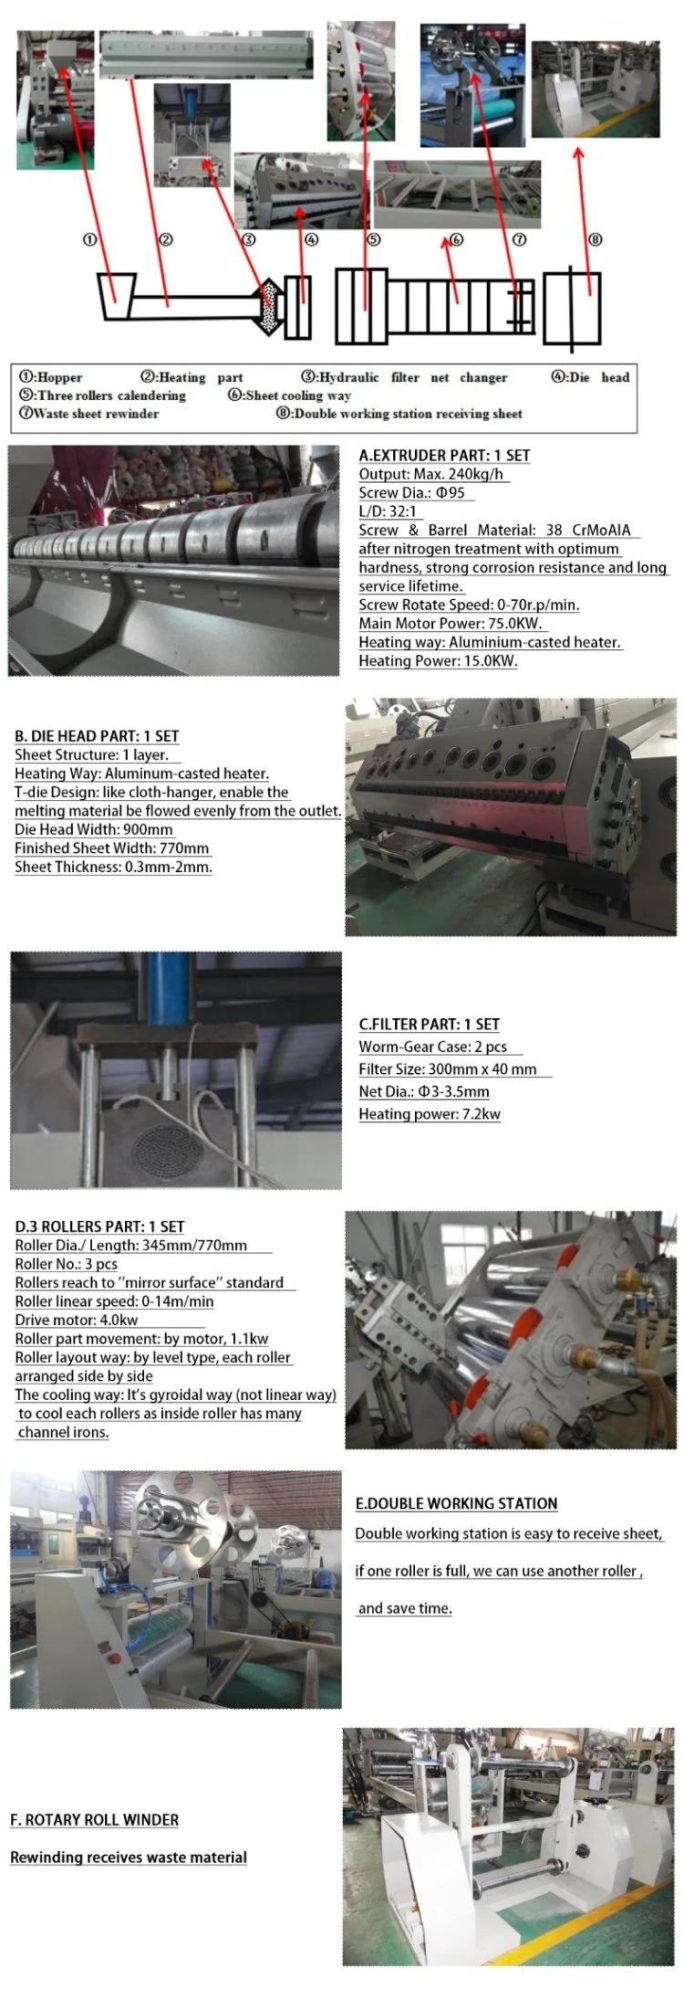 High Quality Sheet Extruder Thermoforming Machine for Making Plastic Box Packing Box and Formwork Board